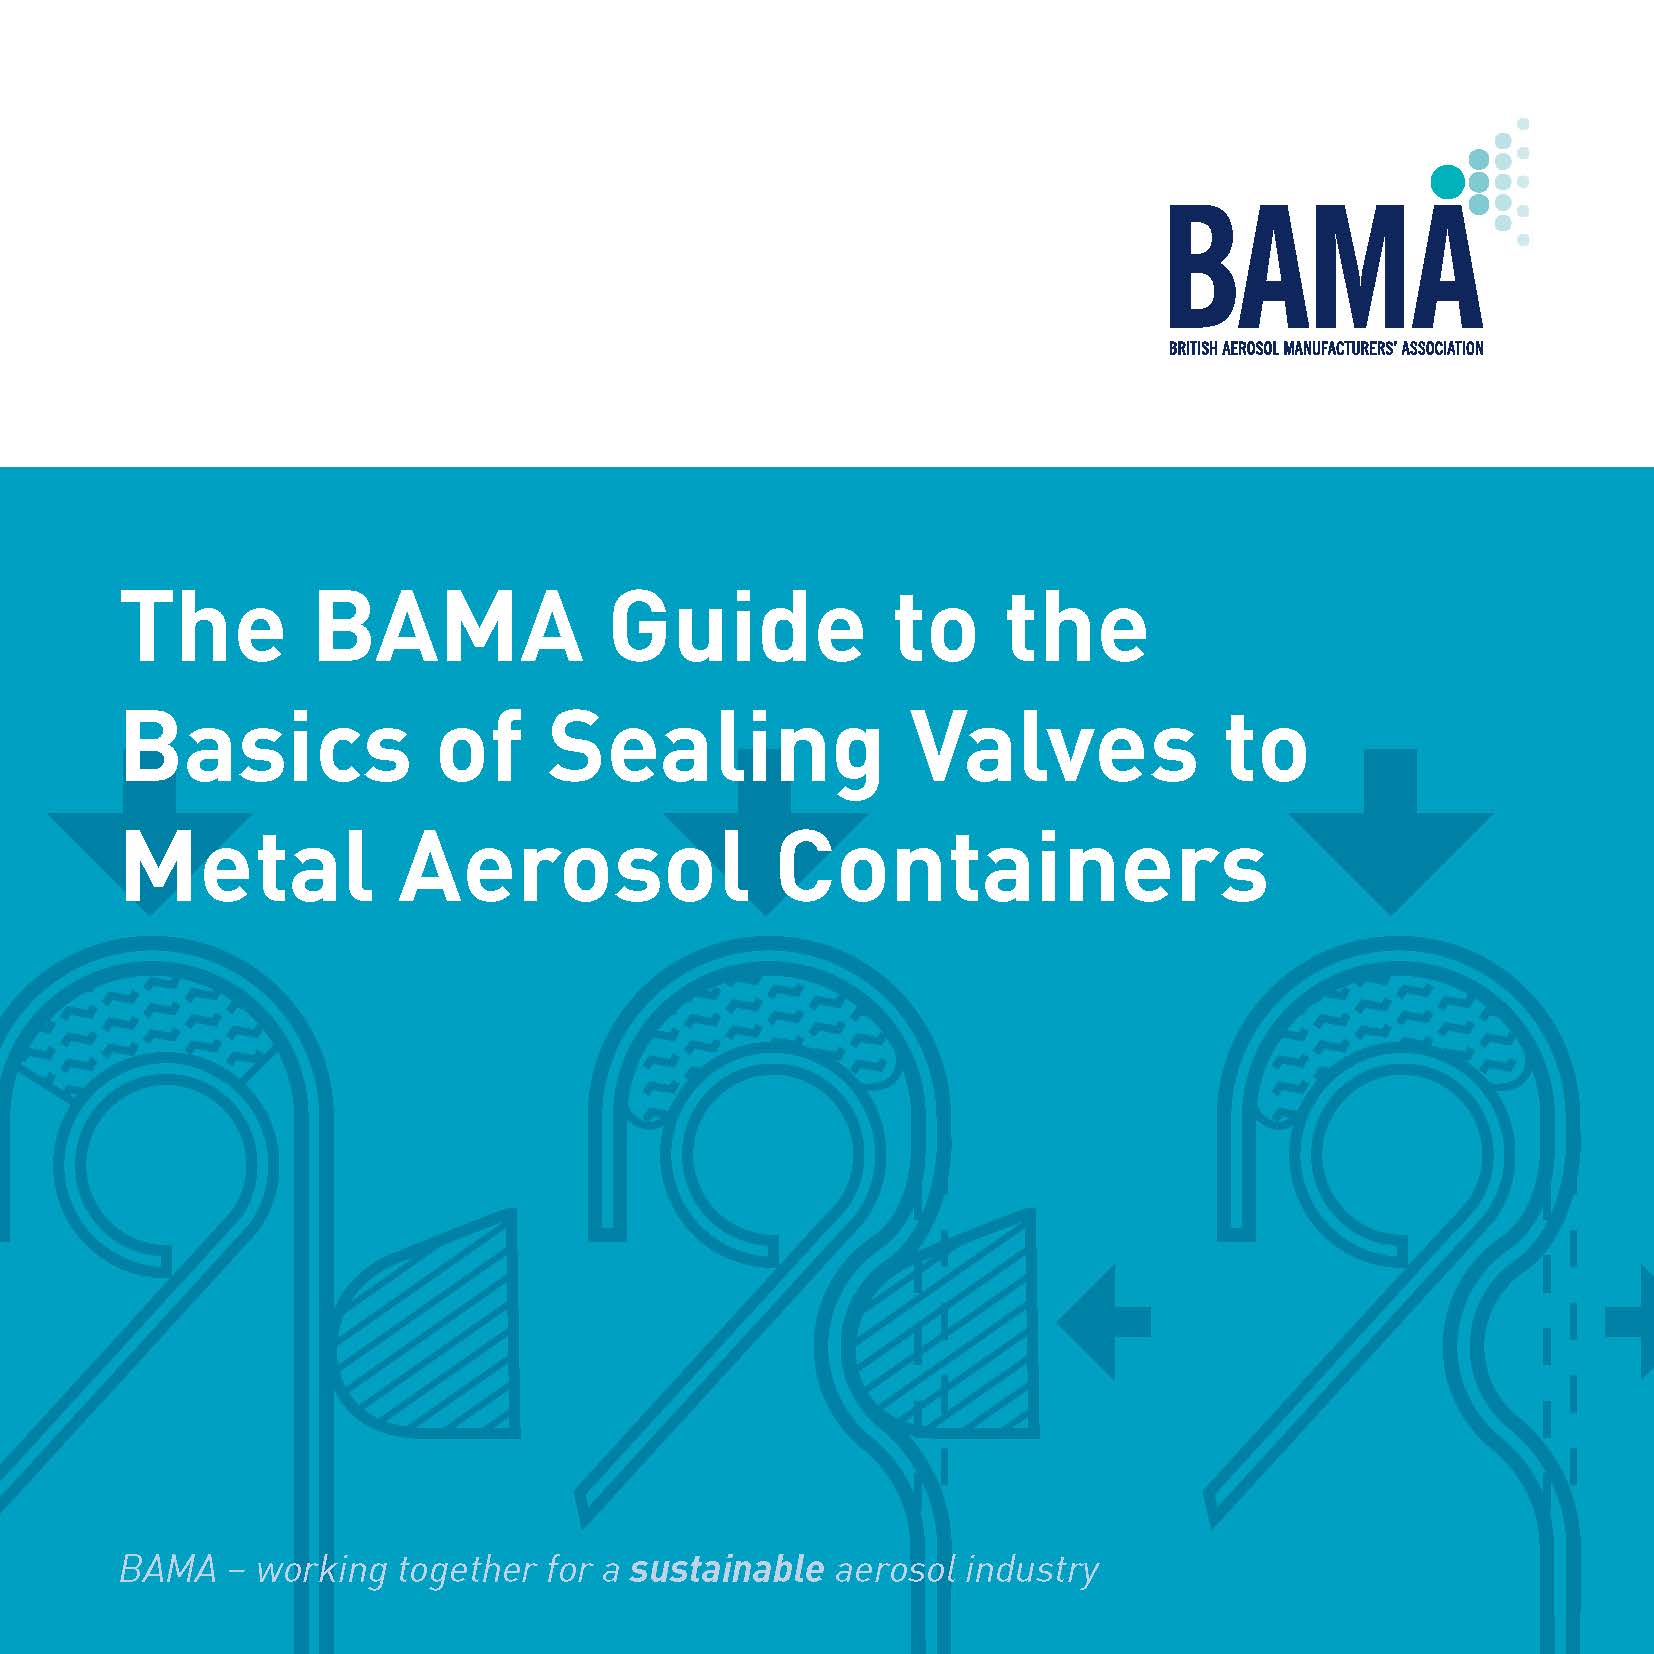 BAMA Guide to the Basics of Sealing Valves to Metal Aerosol Containers